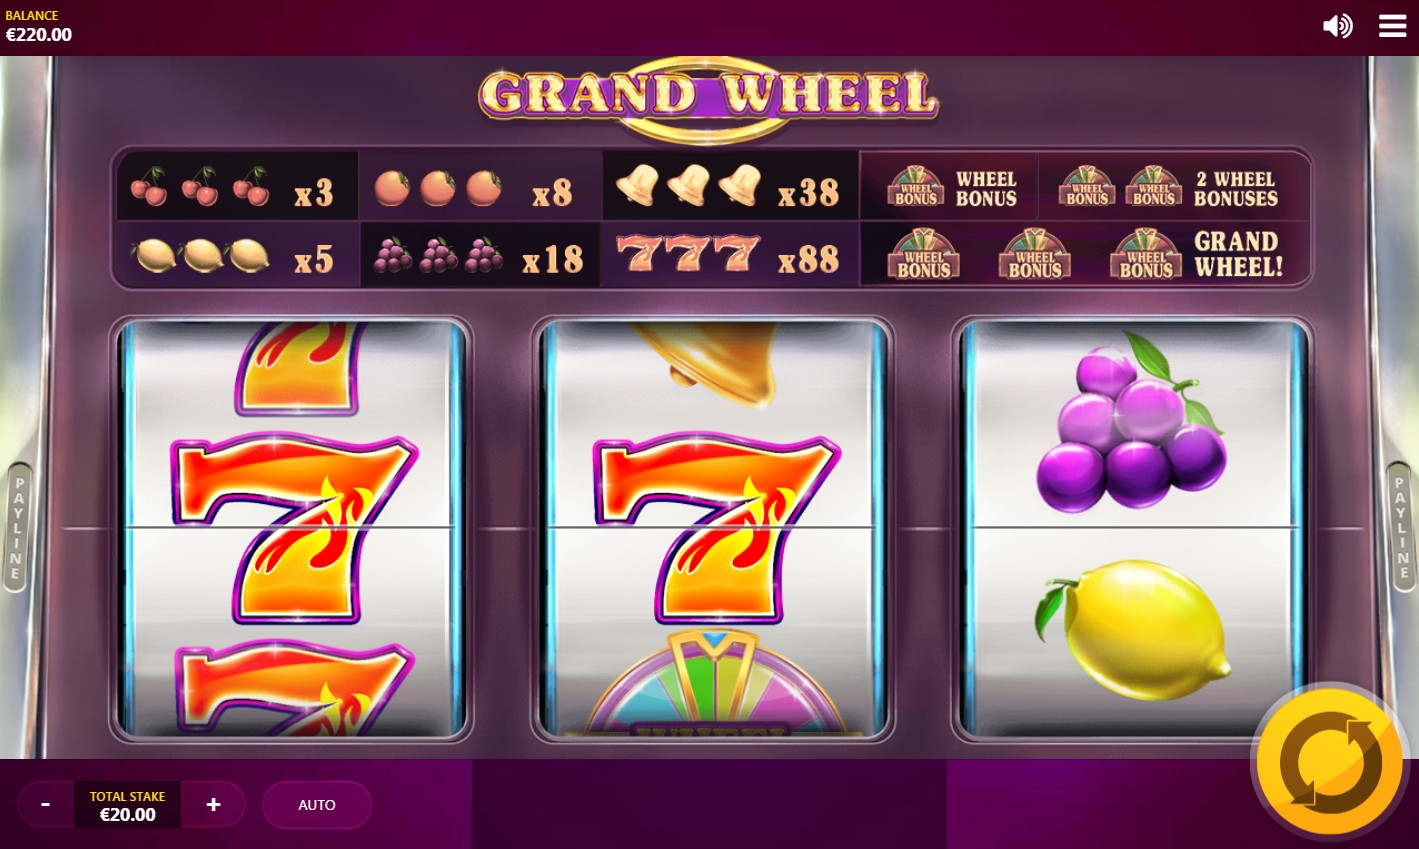 Grand Wheel (Grand Wheel) from category Slots